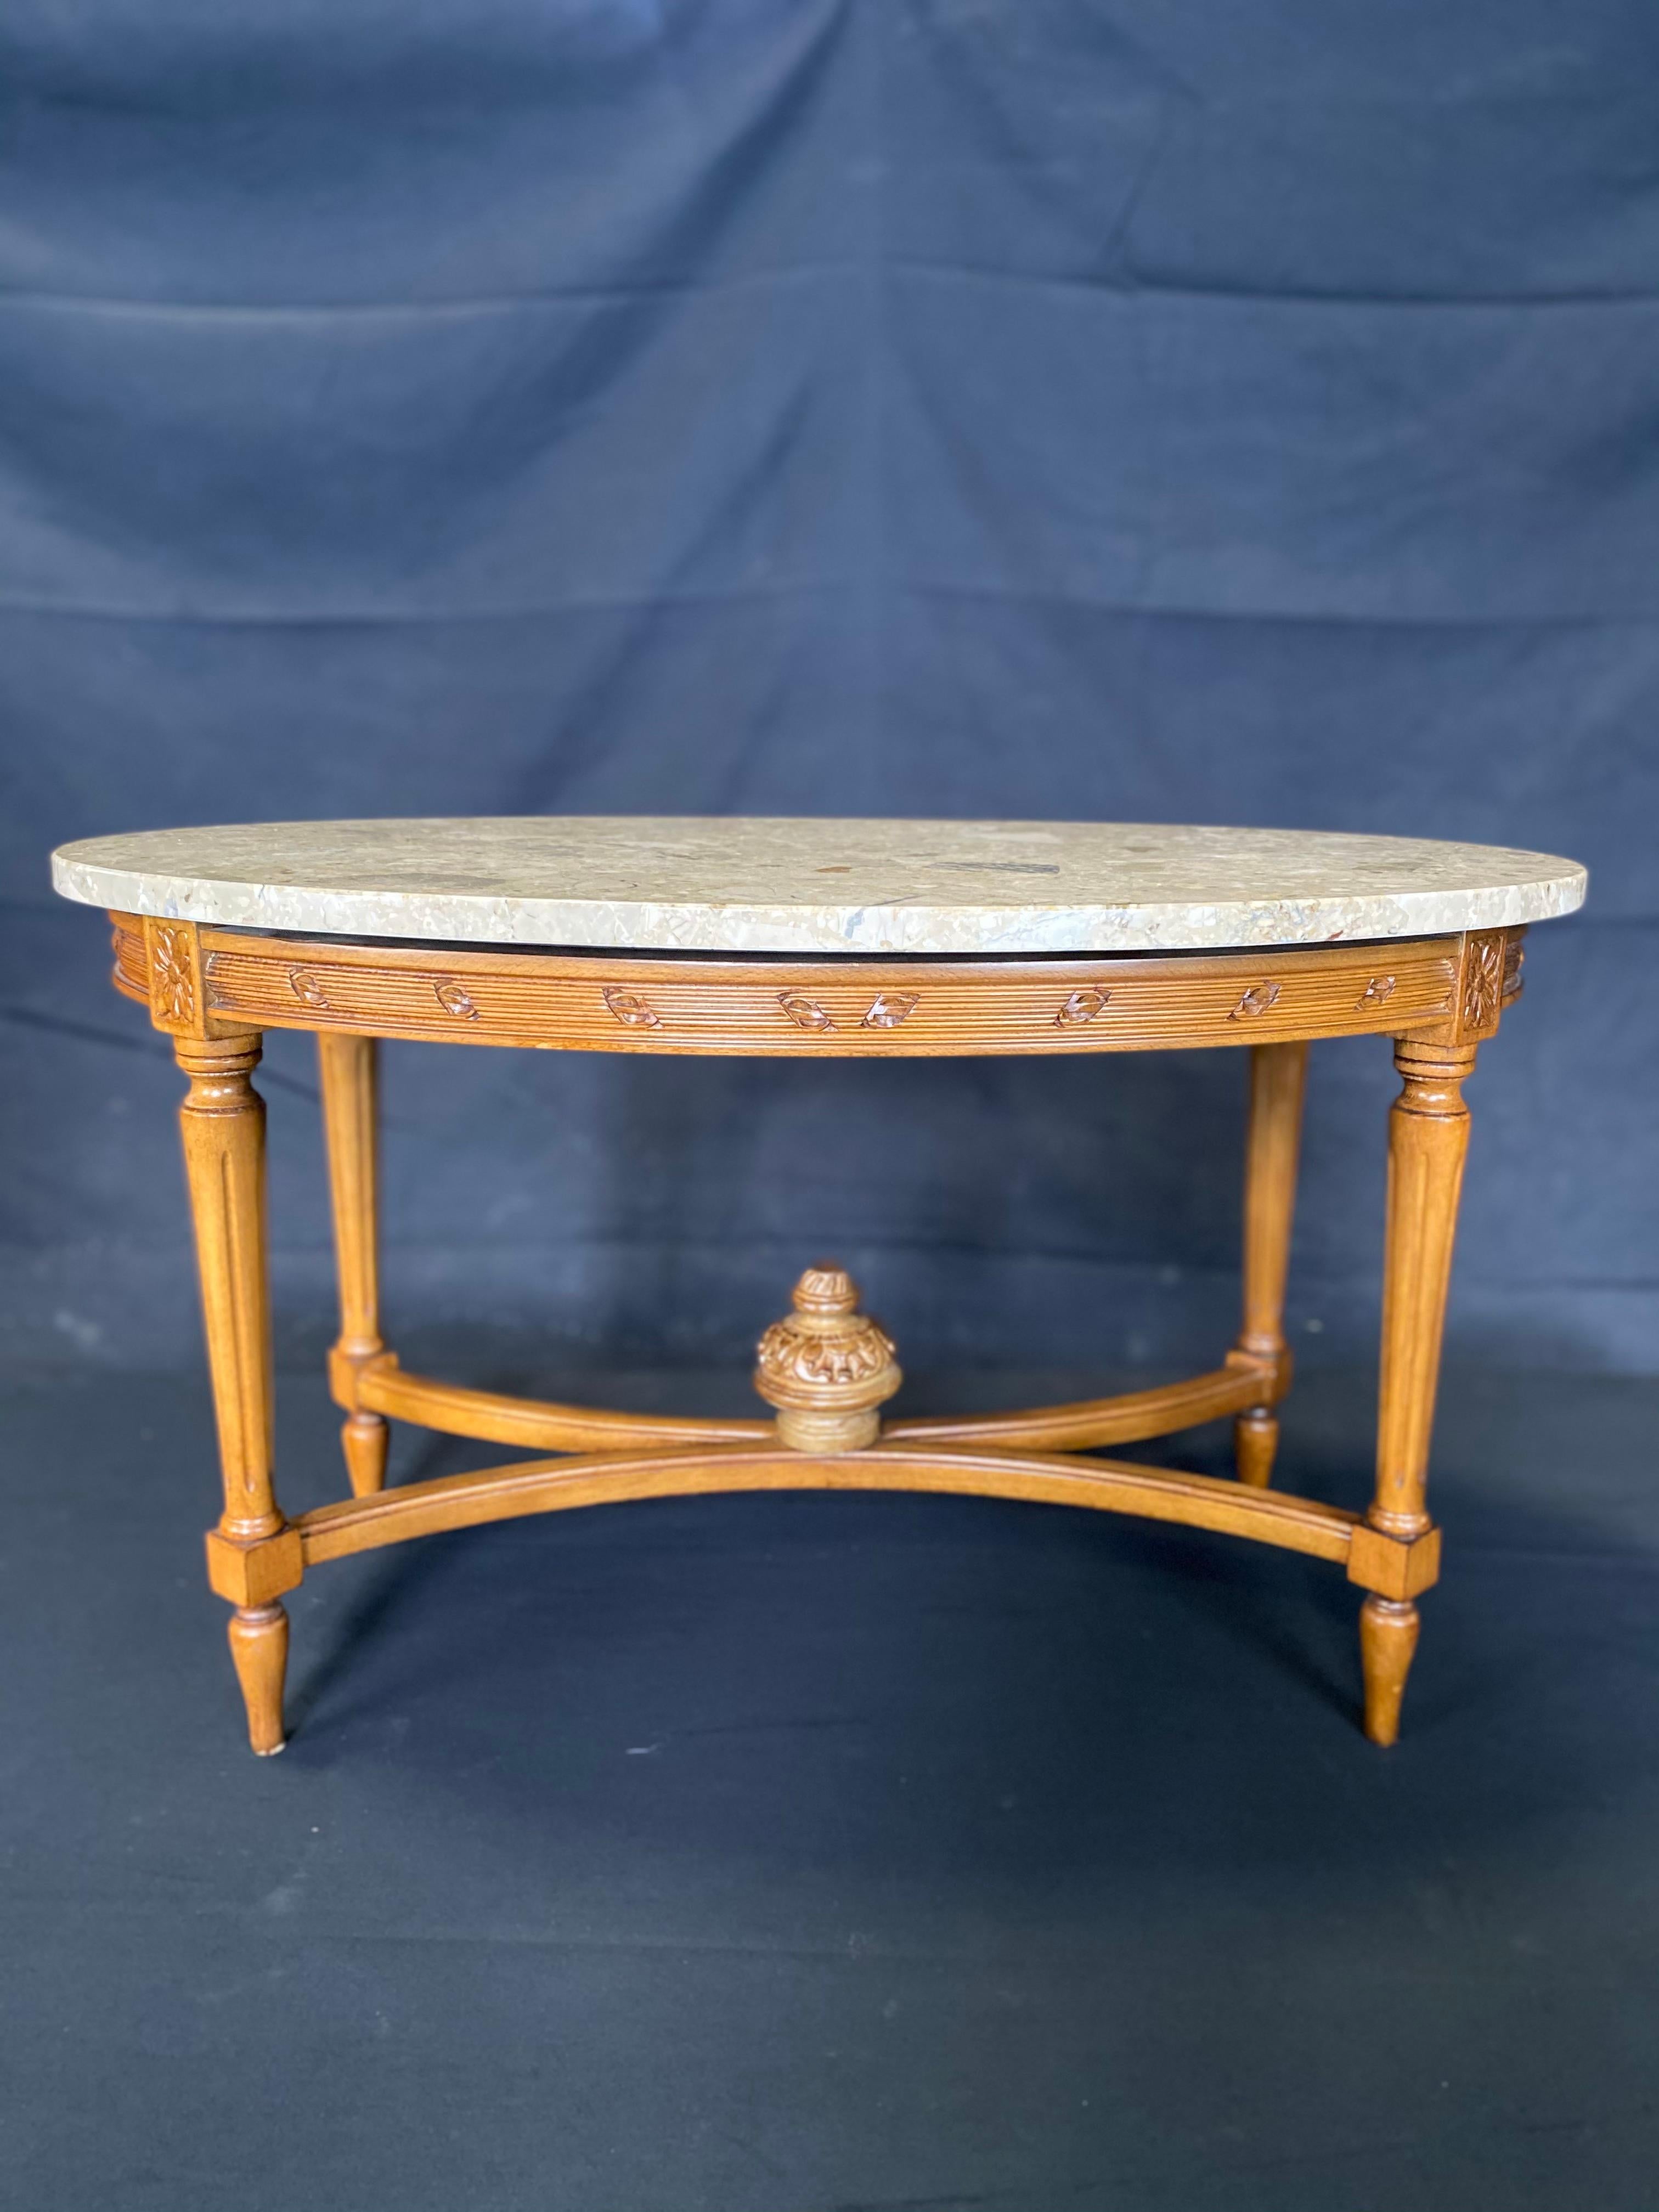 French Louis XVI style oval marble top coffee table, perfect size, with beautifully carved floret and reeding in the base. Great neutral beige marble top color. #5047.